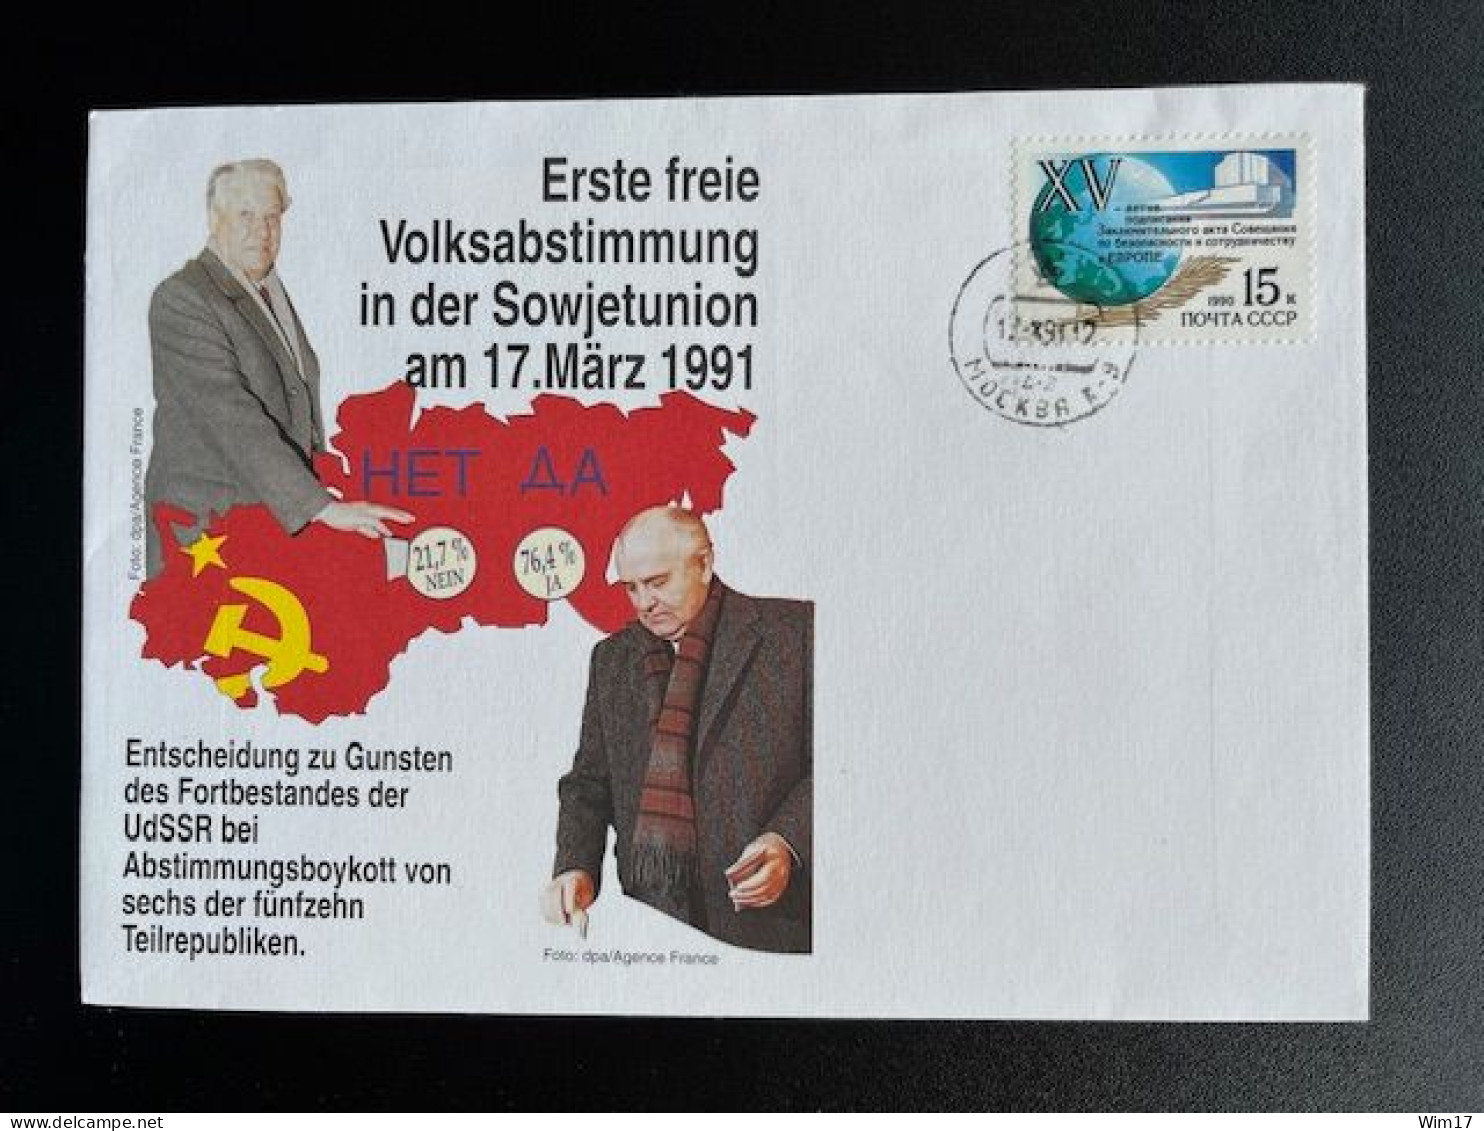 RUSSIA USSR 1991 SPECIAL COVER FIRST FREE ELECTIONS 17-03-1991 SOVJET UNIE CCCP SOVIET UNION - Storia Postale